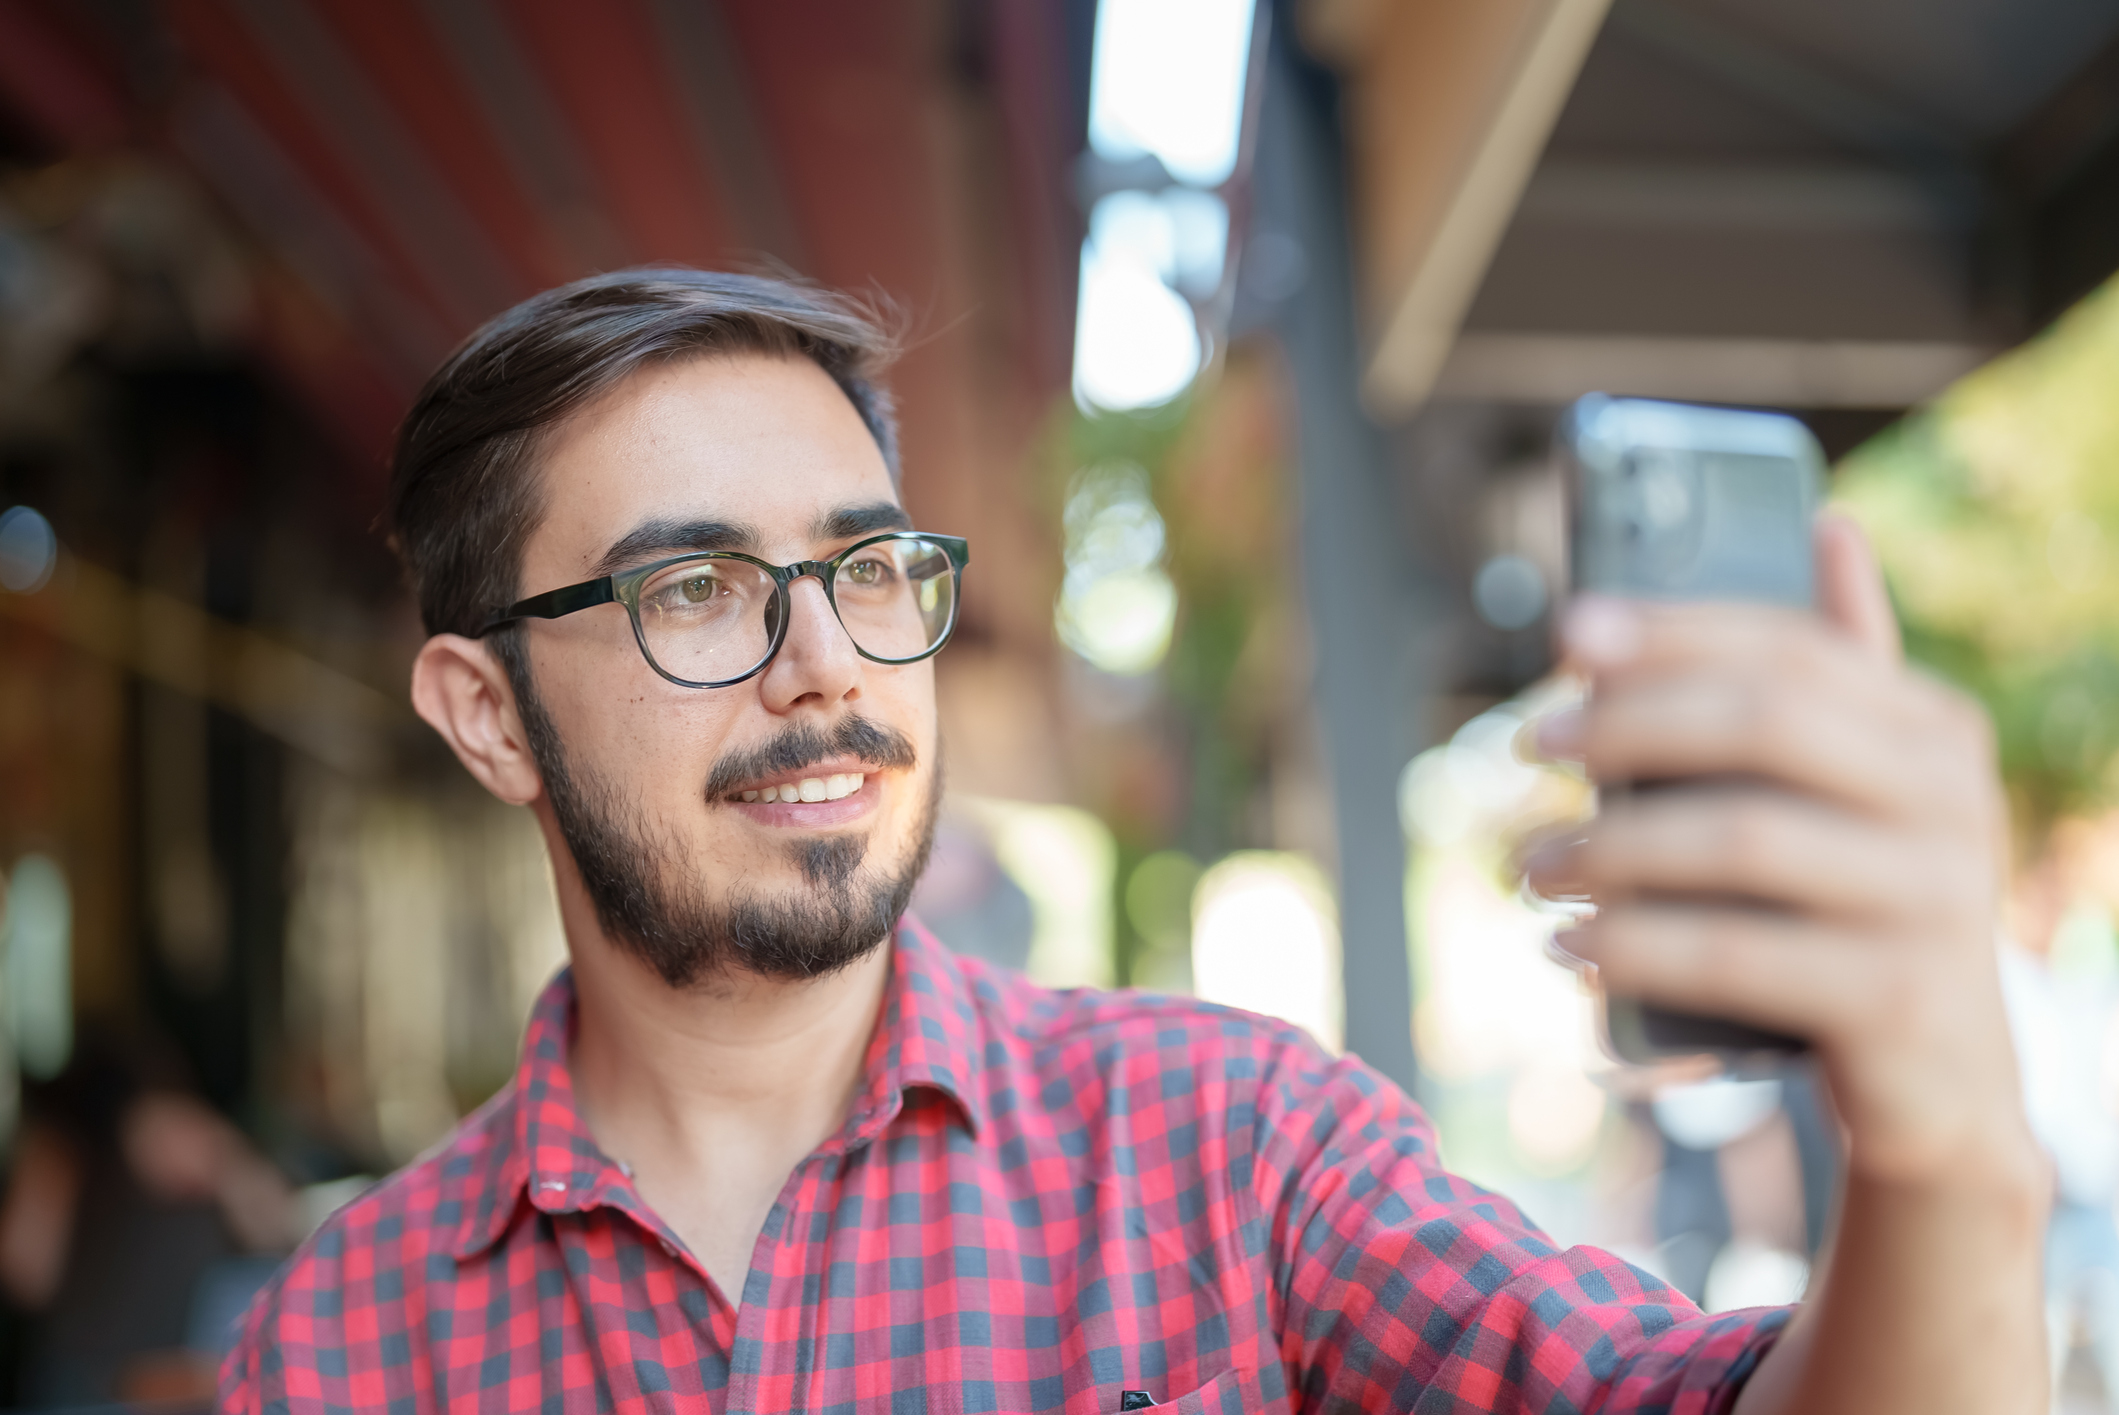 Young man using facial recognition on mobile phone